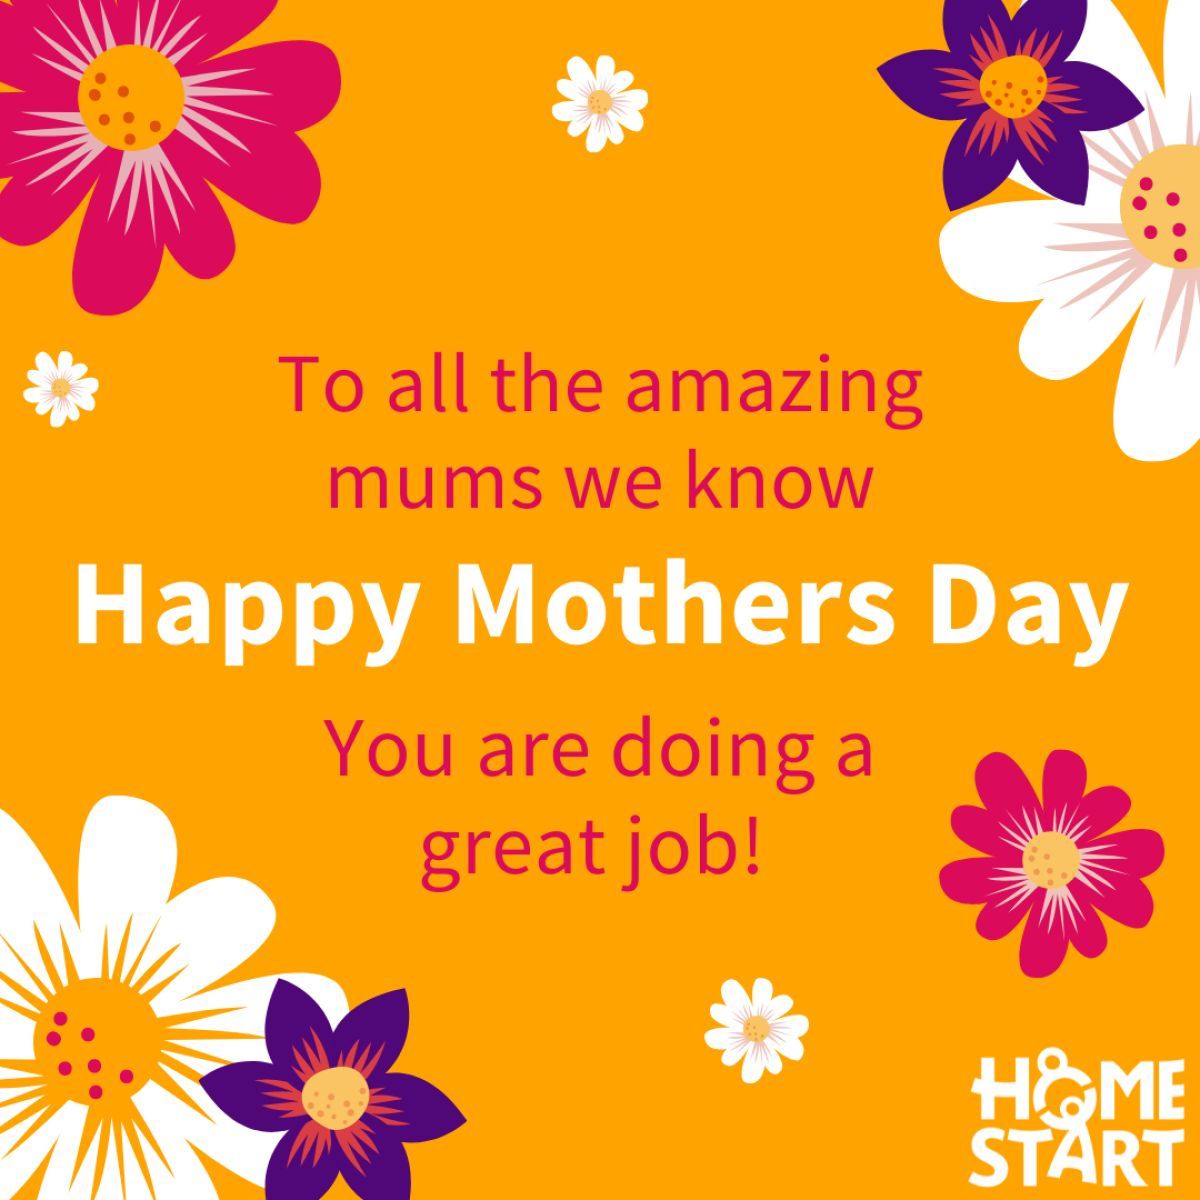 Happy Mother's Day to all the amazing mums we know! 💐 Thinking too about those who yearn to be mums, or mums who have suffered loss 💜💜 . #MothersDay #EnjoyCuddles #SoakUpTheirLove #HereForFamilies